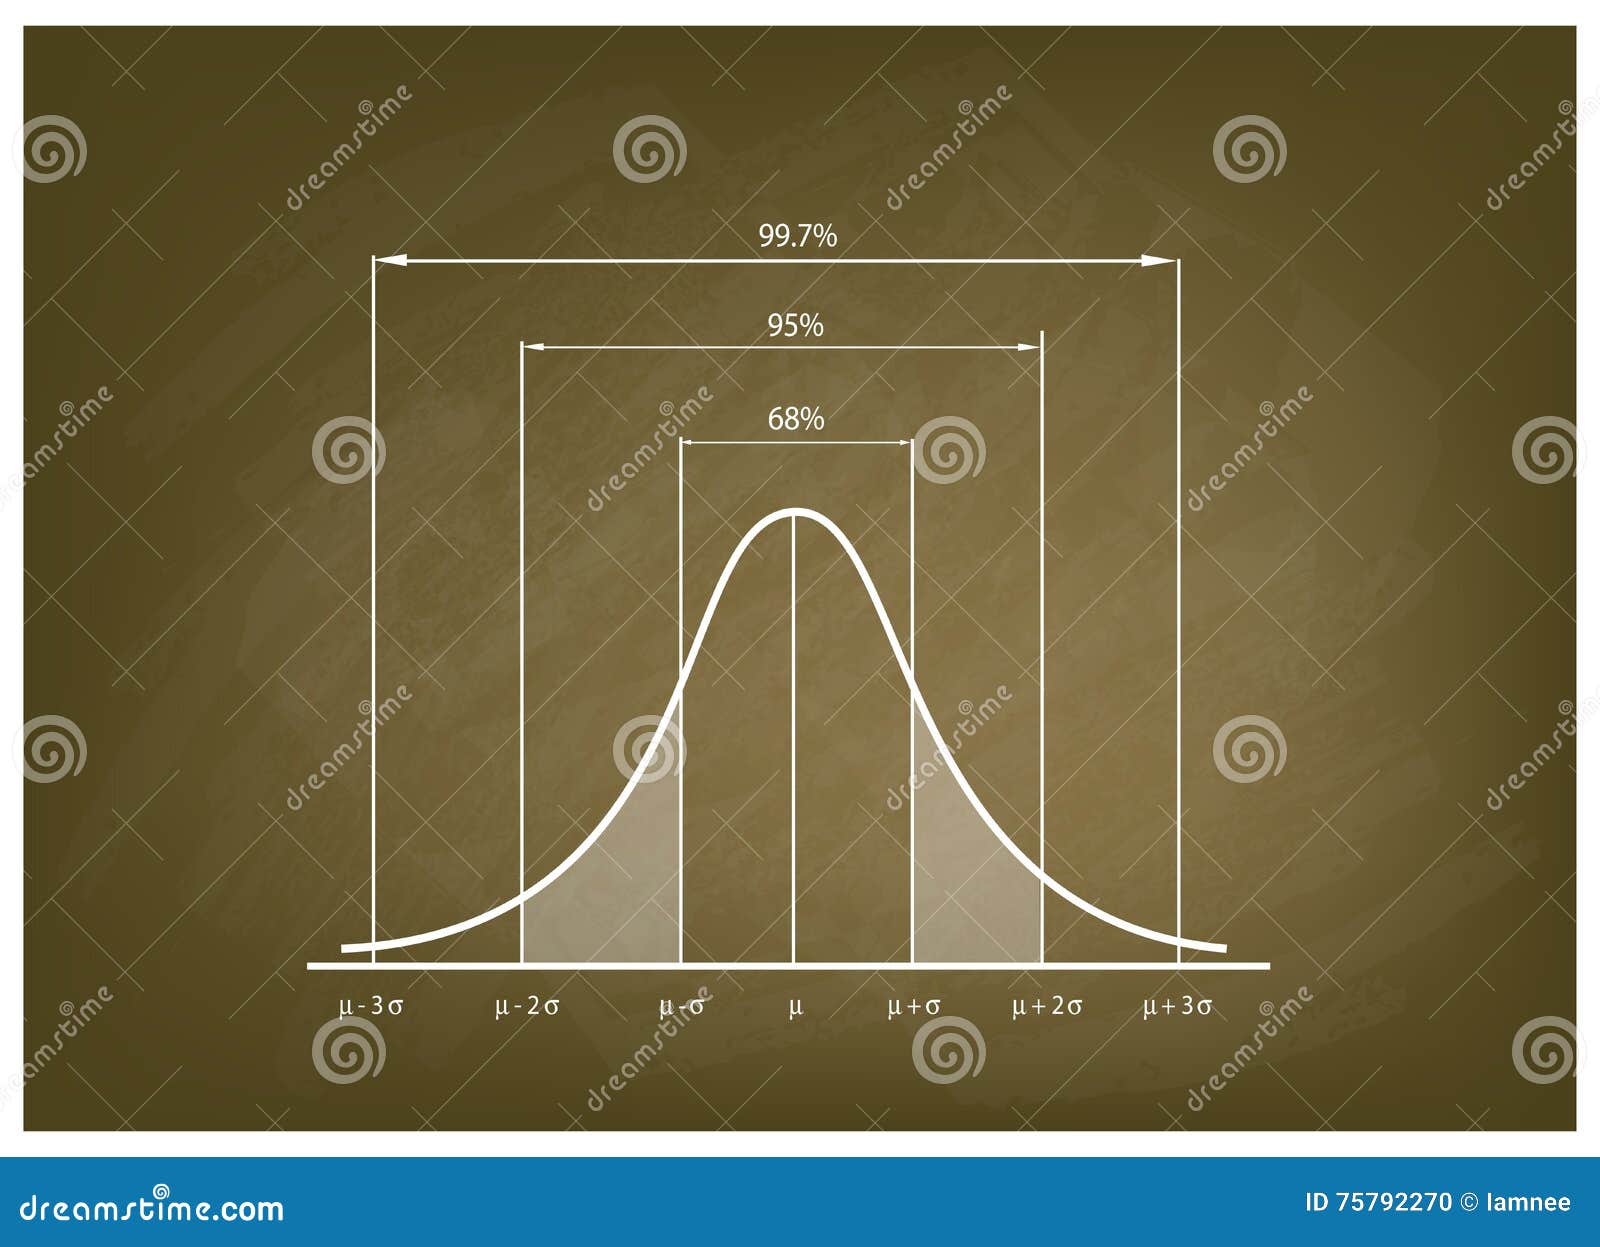 Normal Distribution Chart Or Gaussian Bell Curve On 